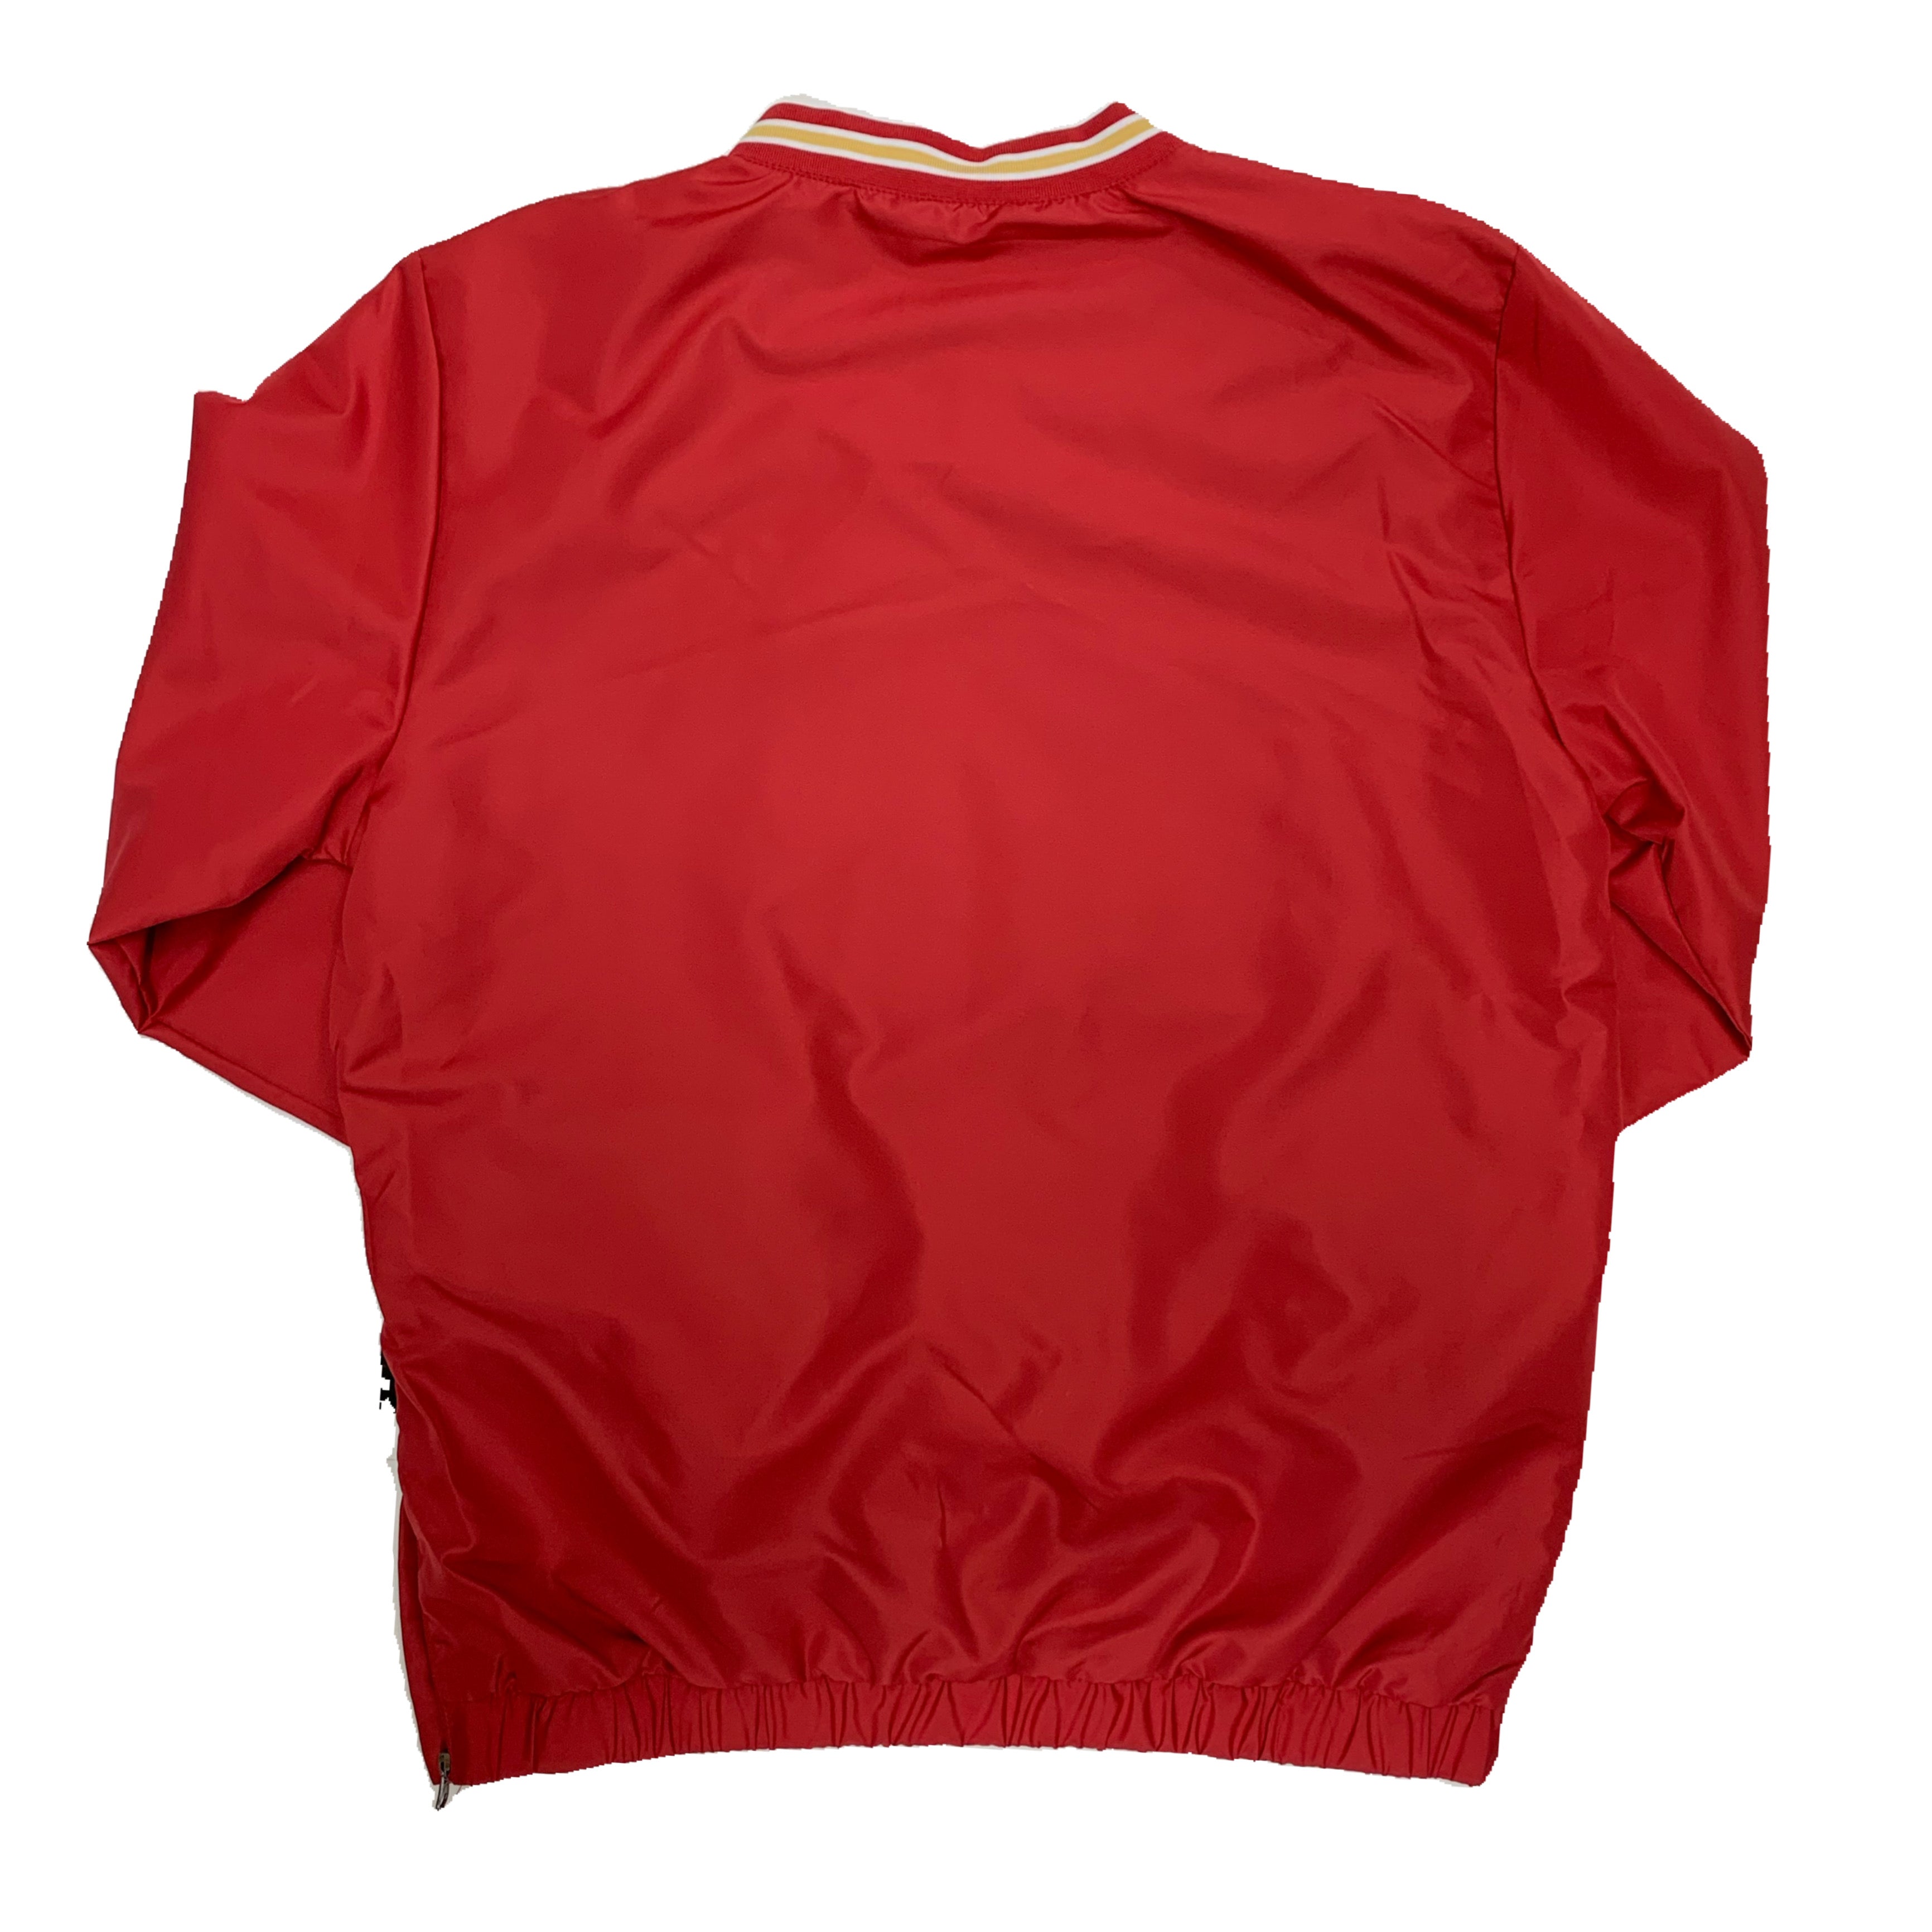 San Francisco 49ers Windbreaker with Pocket - Red